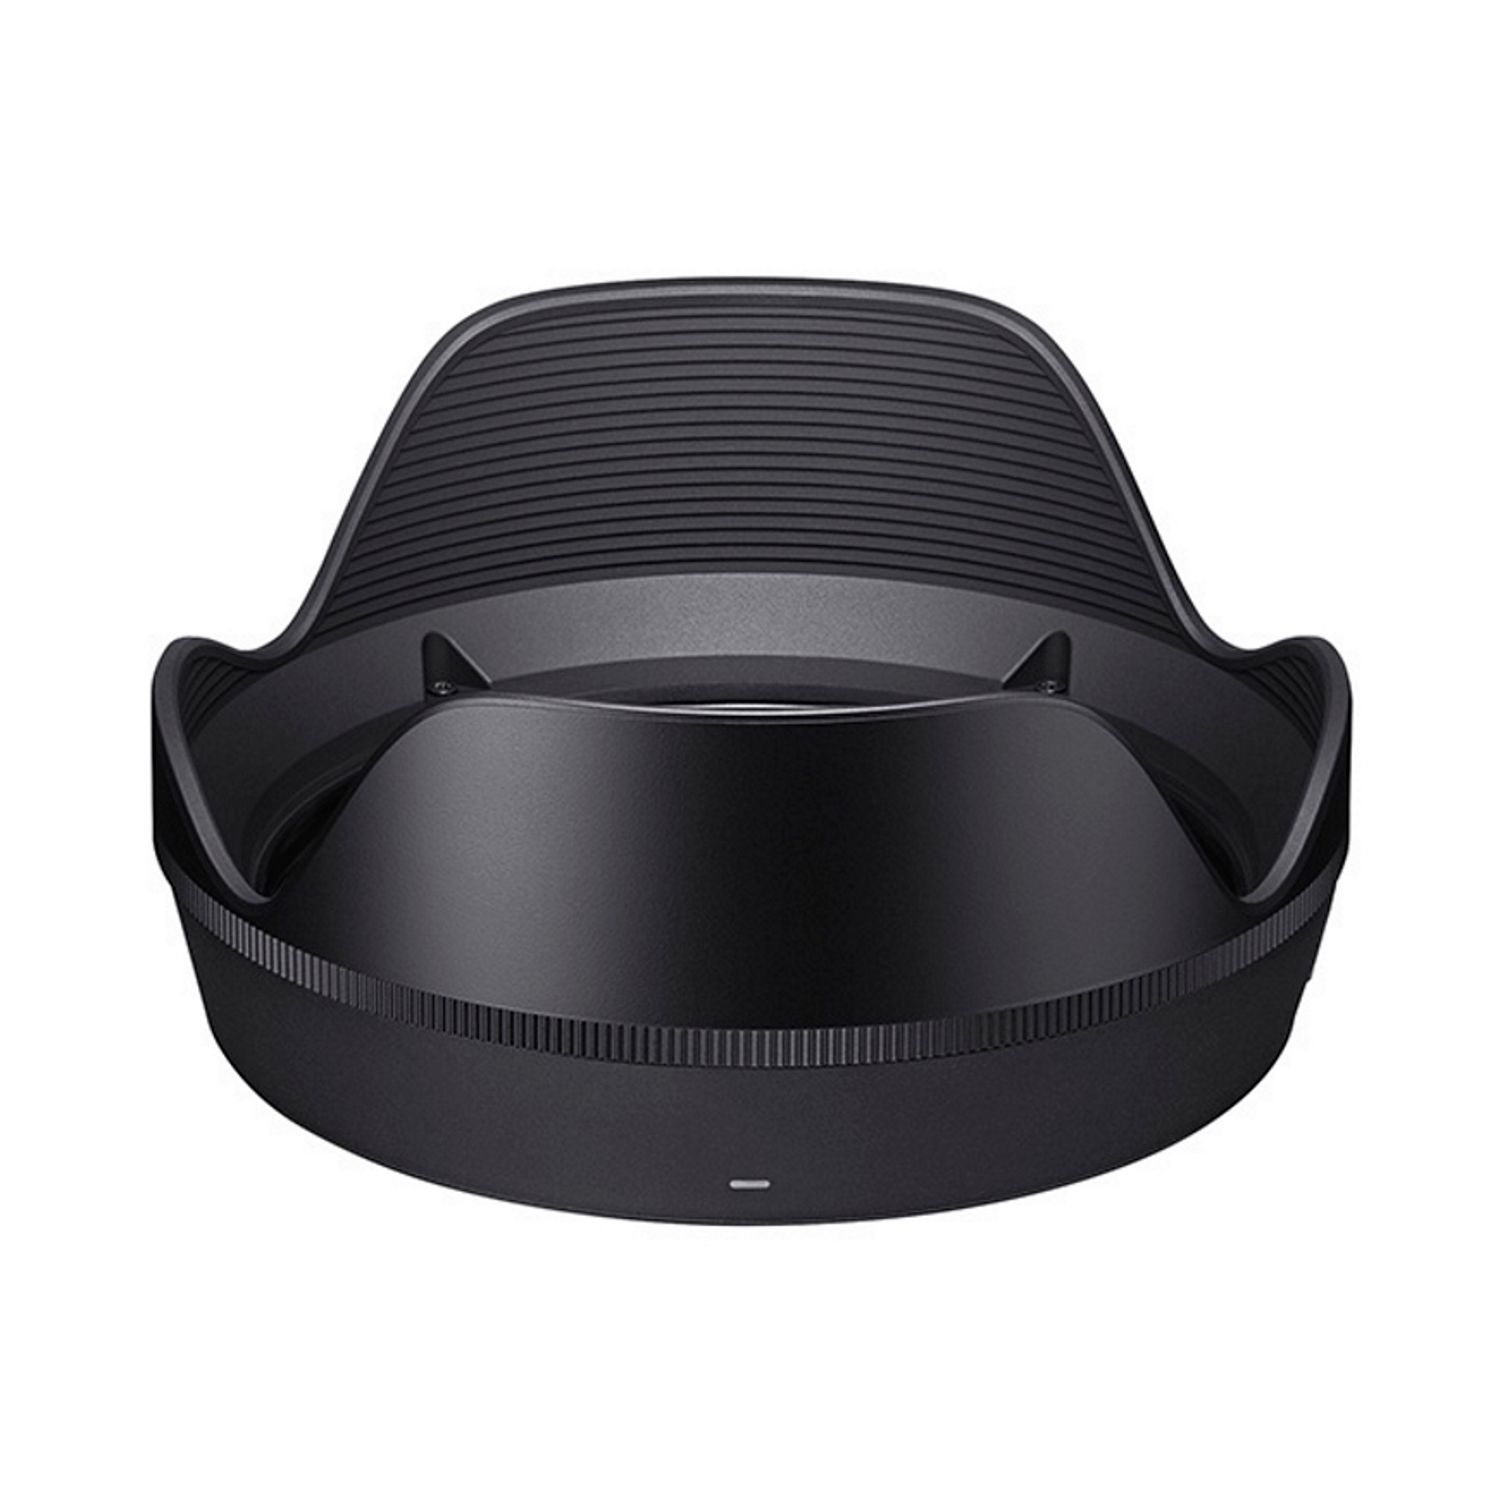 Sigma LH878-03 Lens Hood for 24-70mm Sony E-Mount